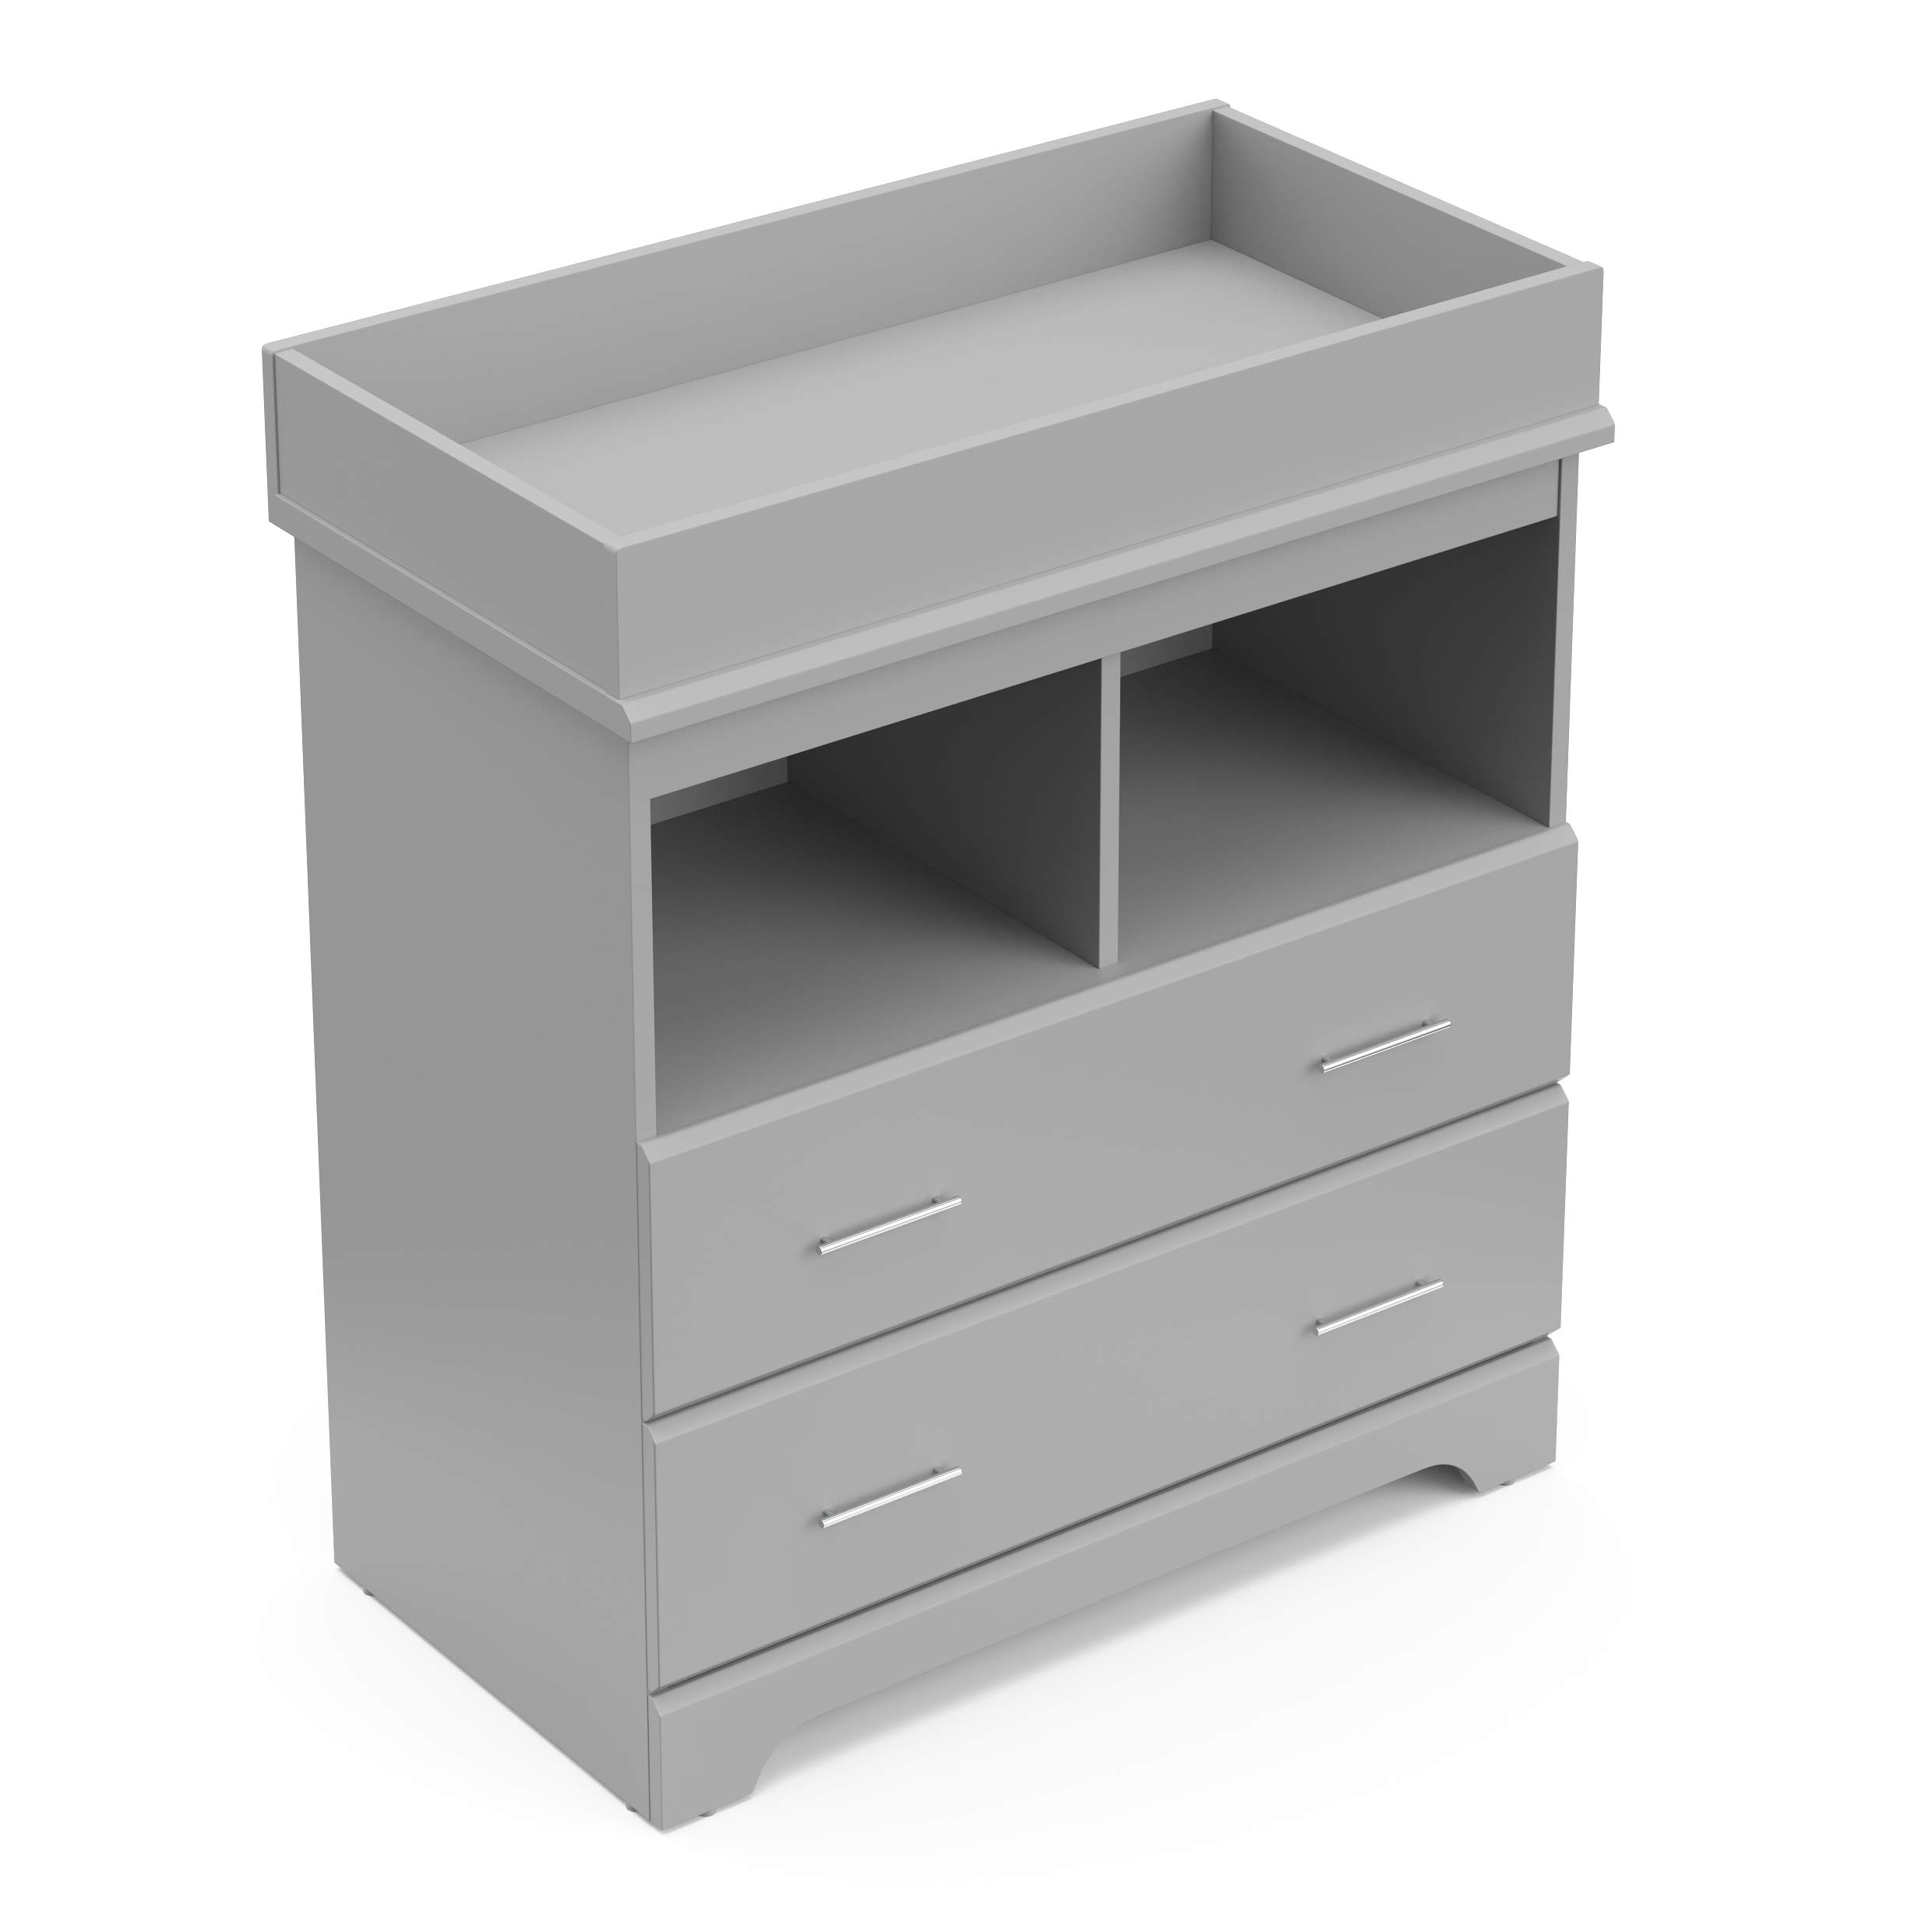 Storkcraft Brookside 2 Drawer Changing Table Dresser (Pebble Gray) – Nursery Dresser Organizer with Changing Table Topper, Chest of Drawers for Bedroom with 2 Drawers, Universal Design